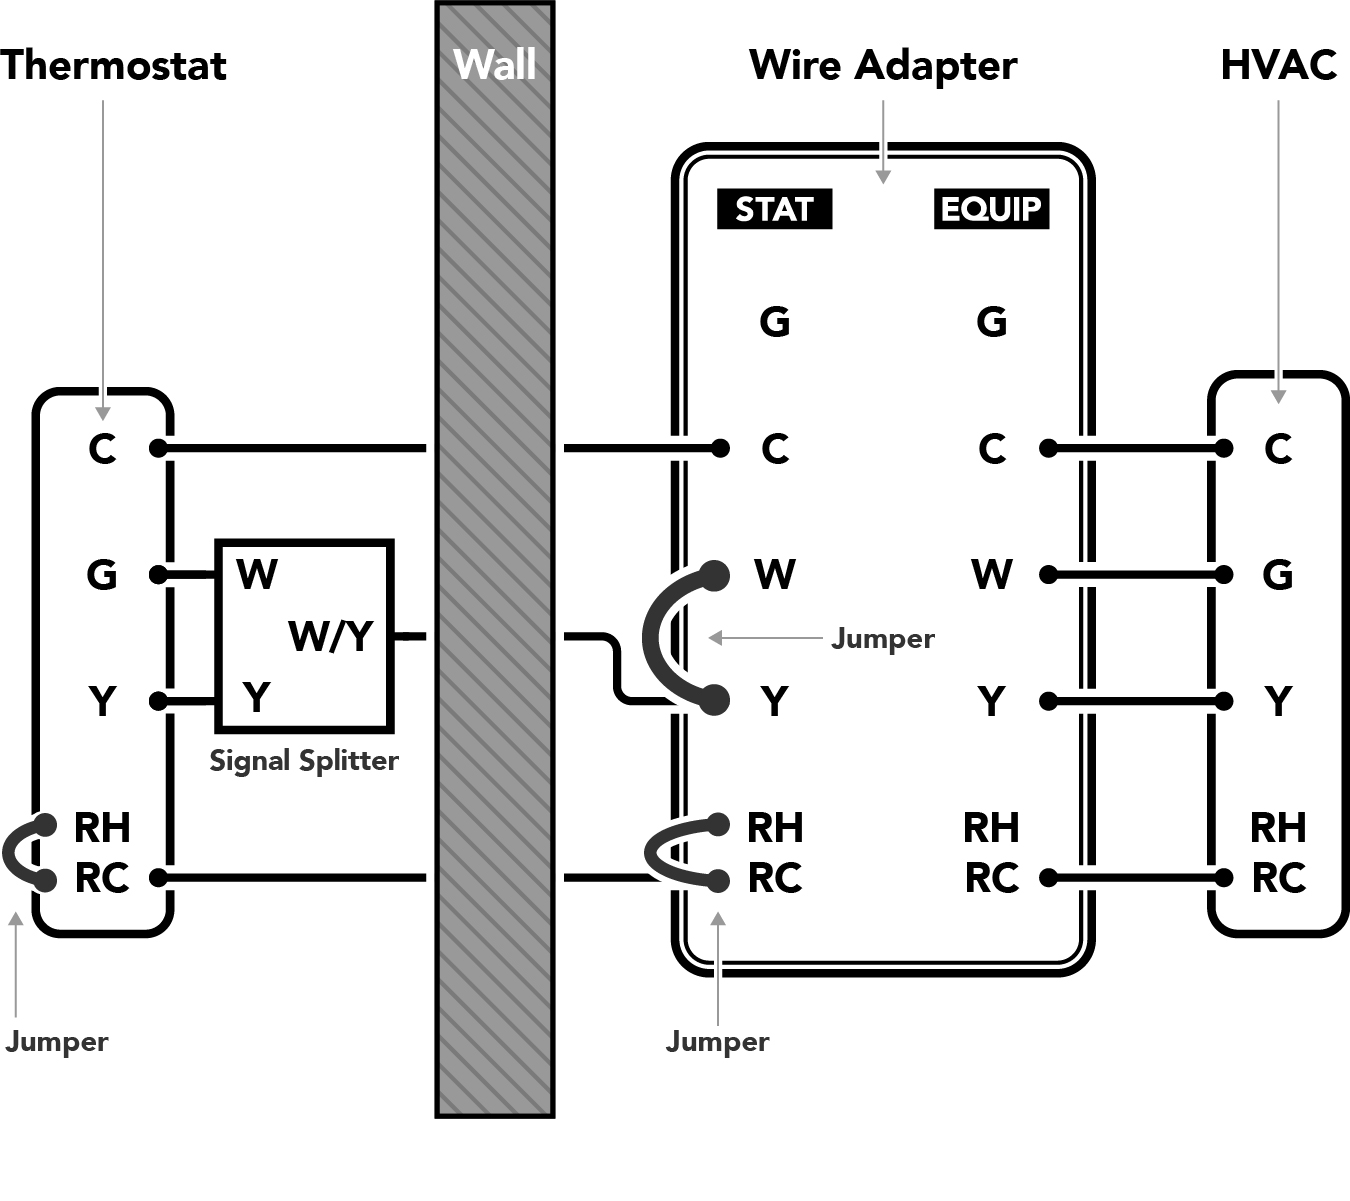 Diagram-04_Conventional-AC-and-Fan_2015-11-17_V3_Conventional_Heat-and-AC_4-Wires_copy_2.jpg